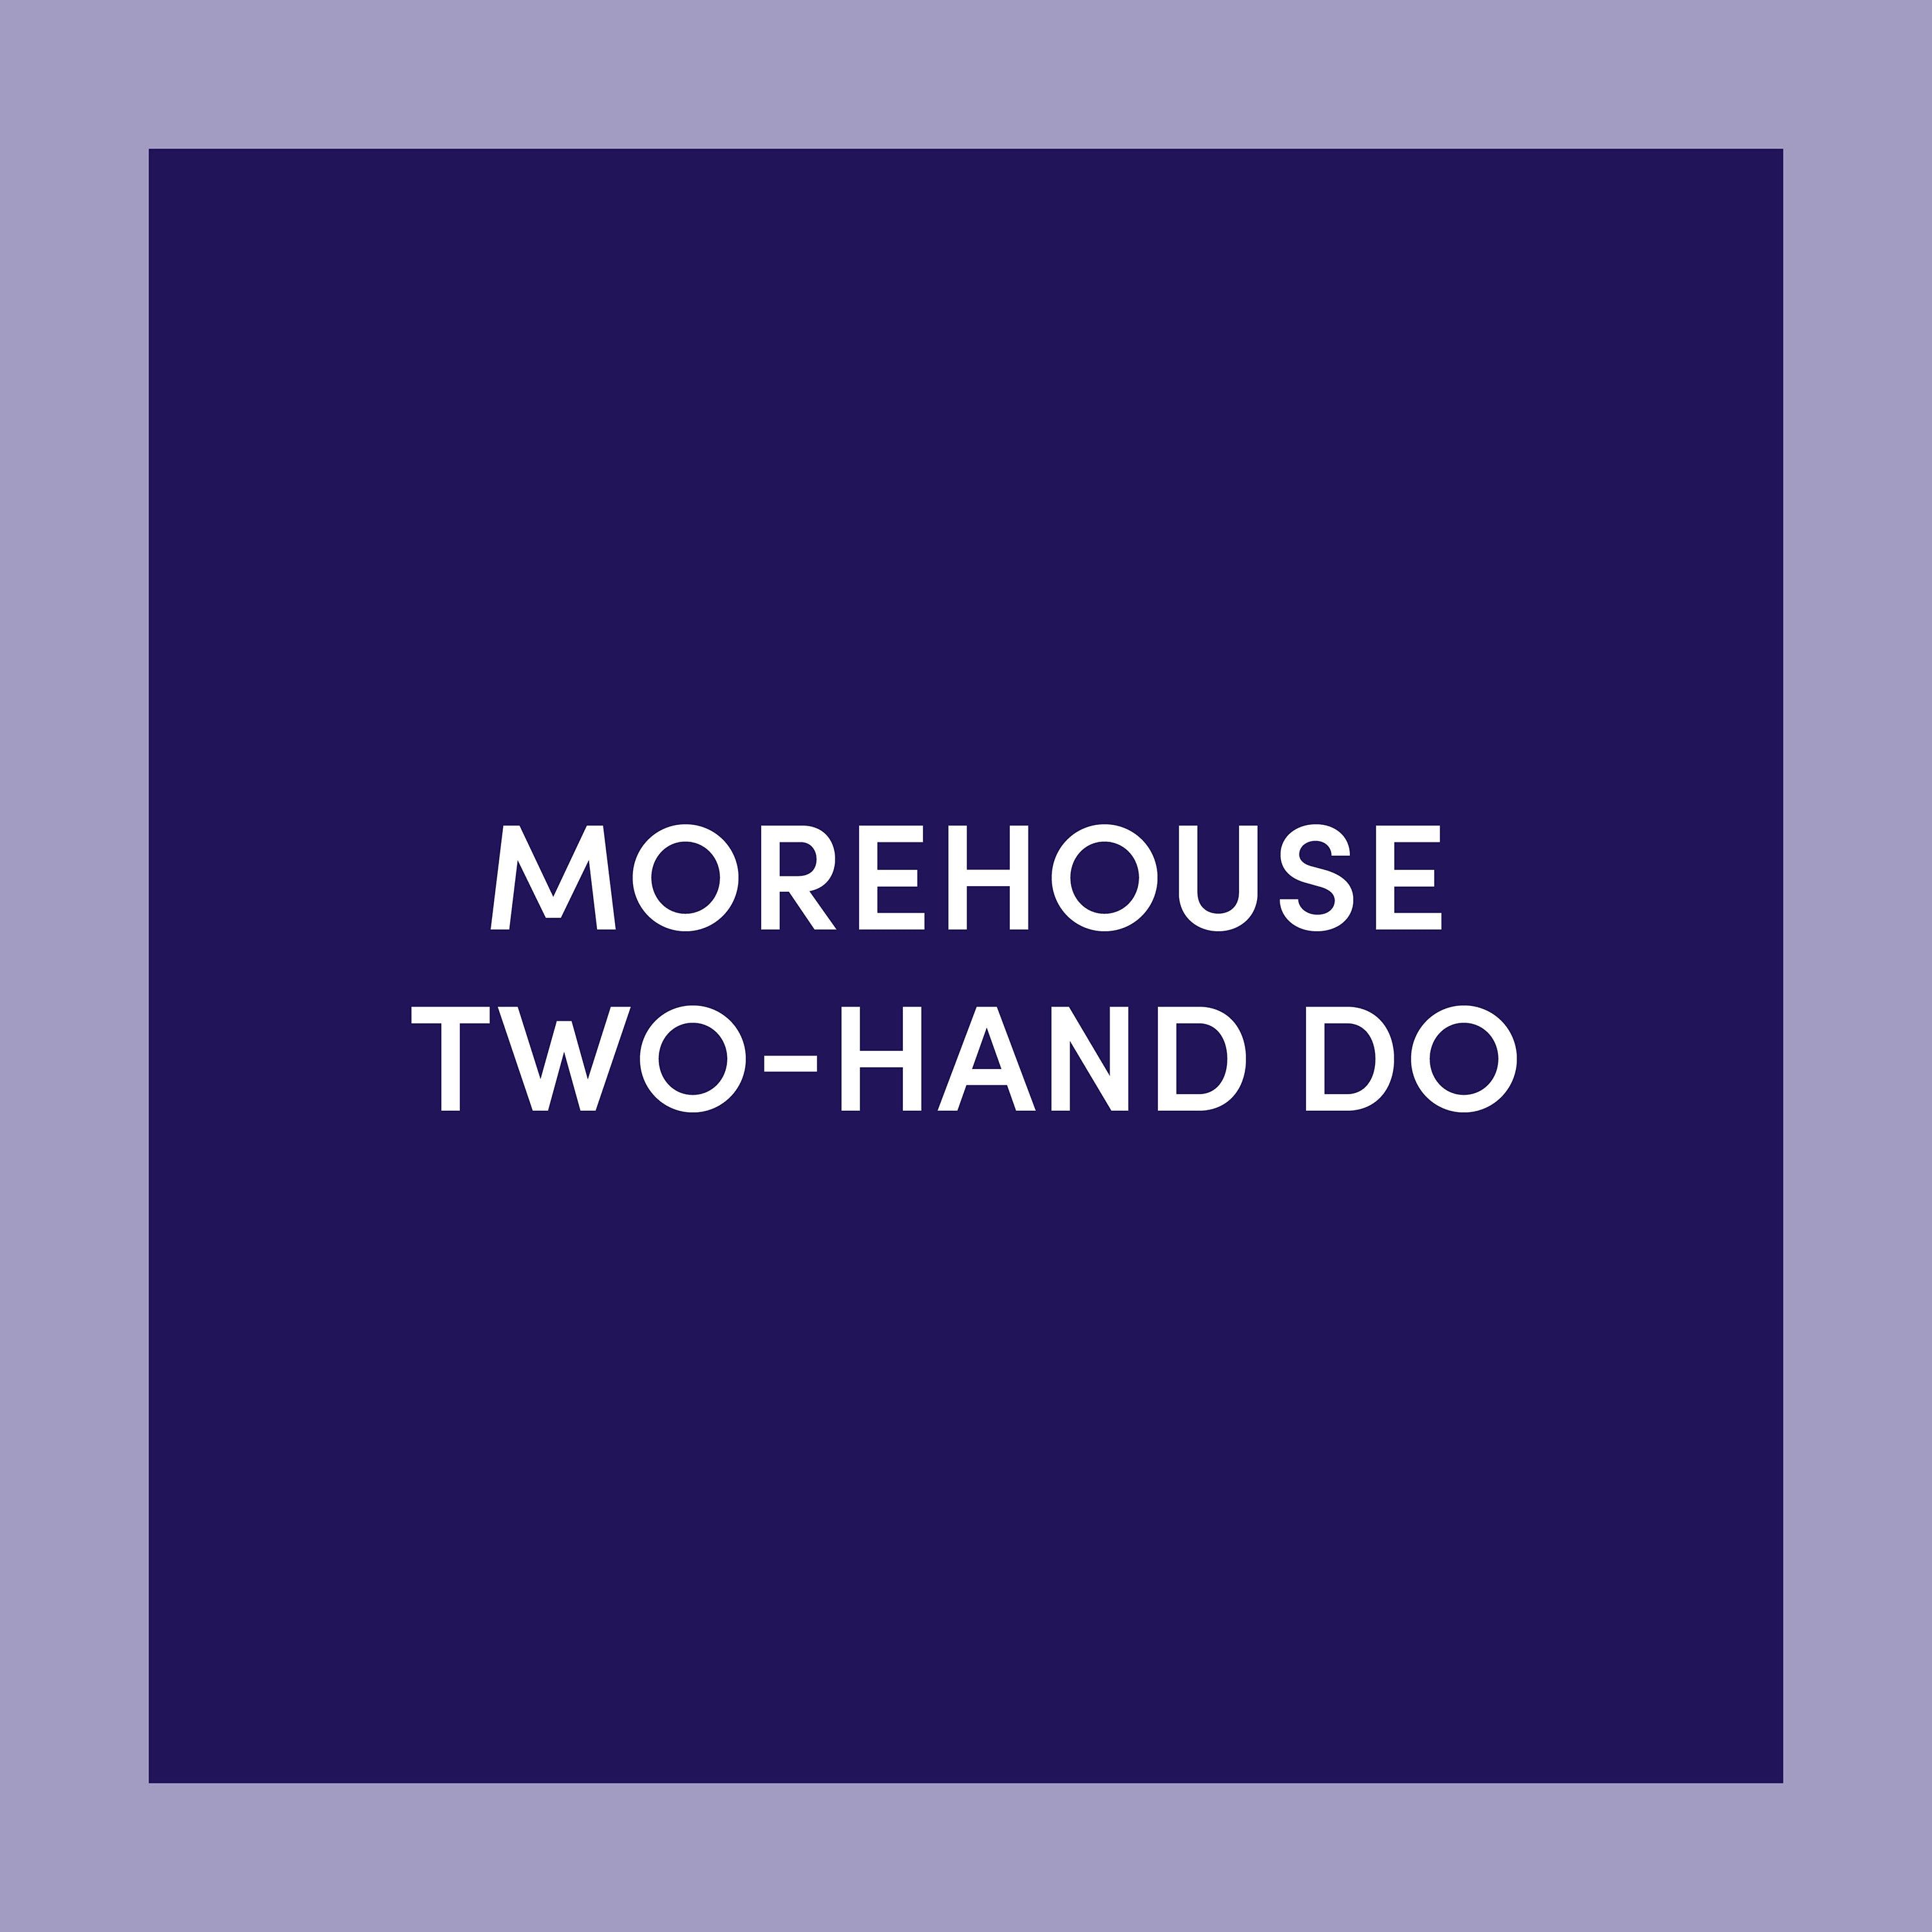 Morehouse Two-Hand Do